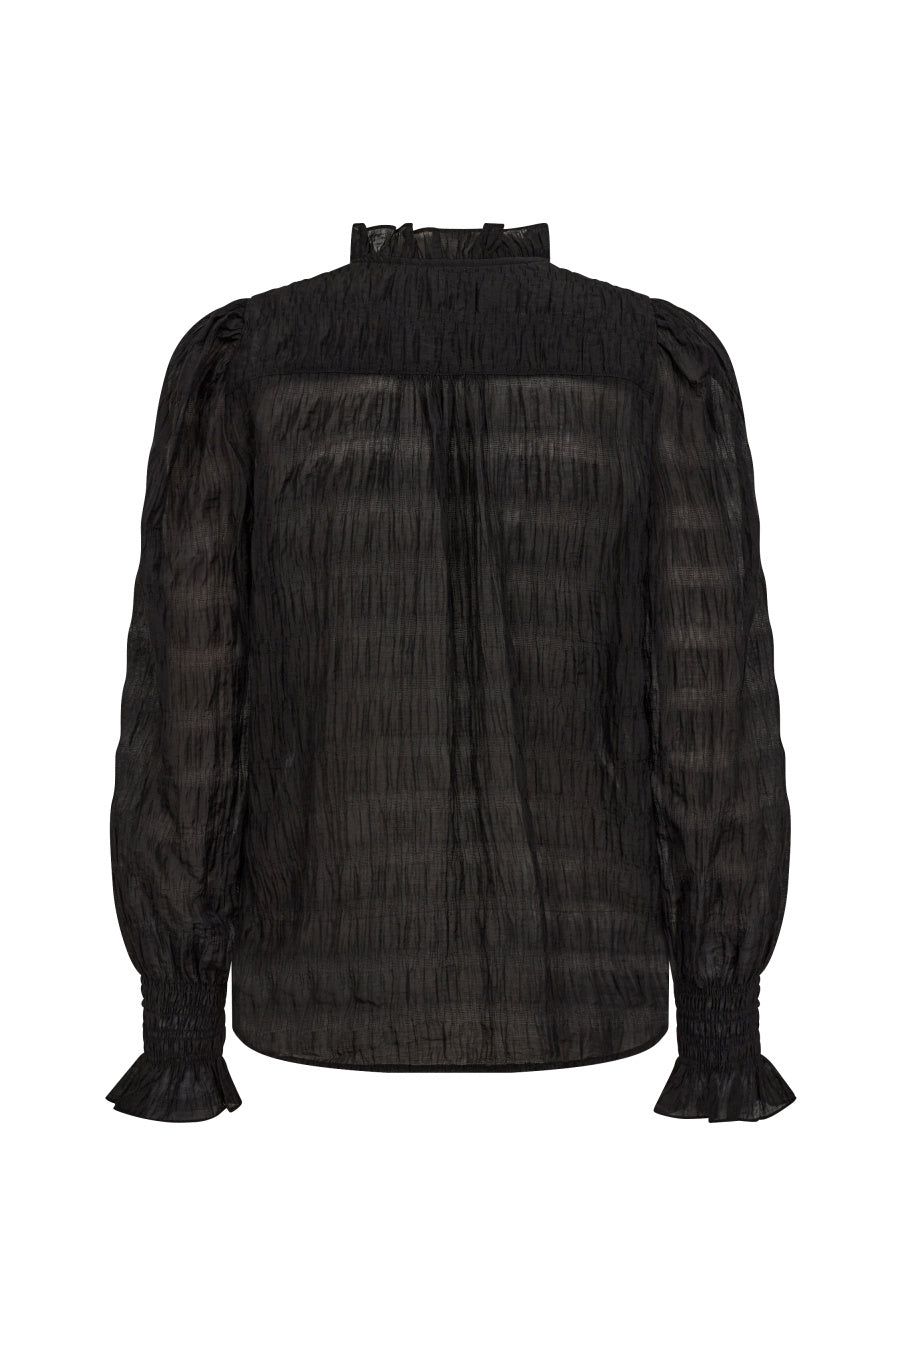 Co'Couture Structure Line Frill Shirt - Black - RUM Amsterdam